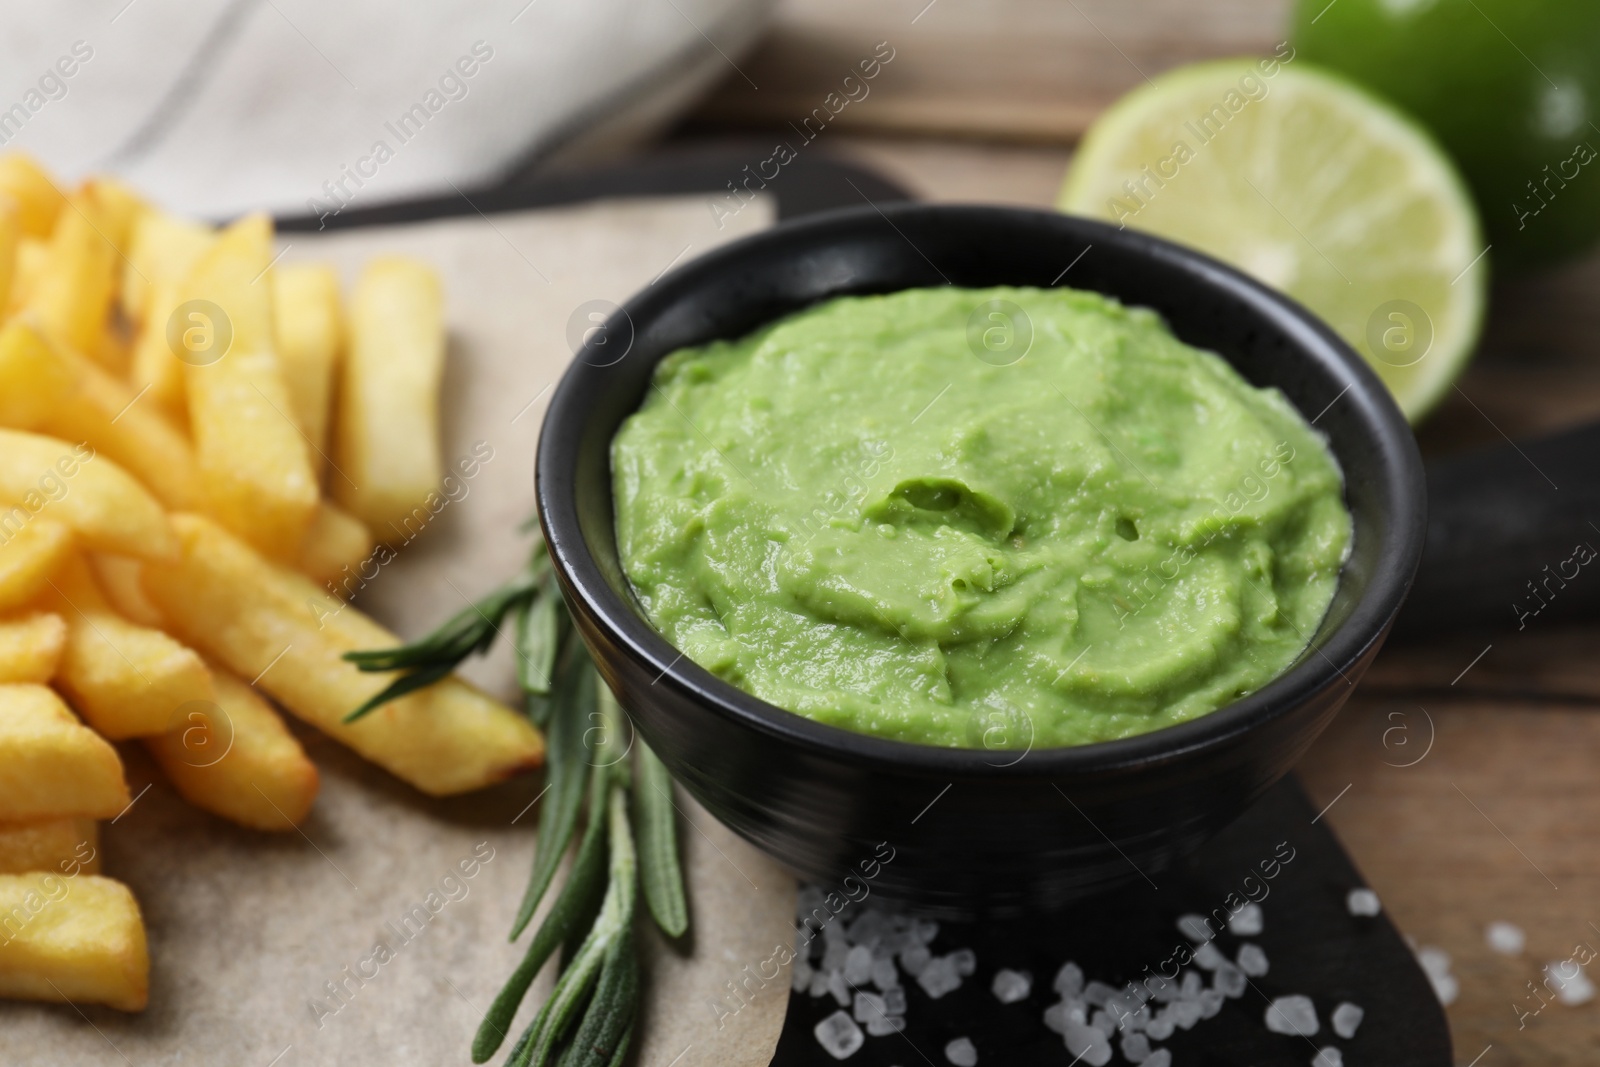 Photo of Serving board with french fries, avocado dip, rosemary and lime served on wooden table, closeup